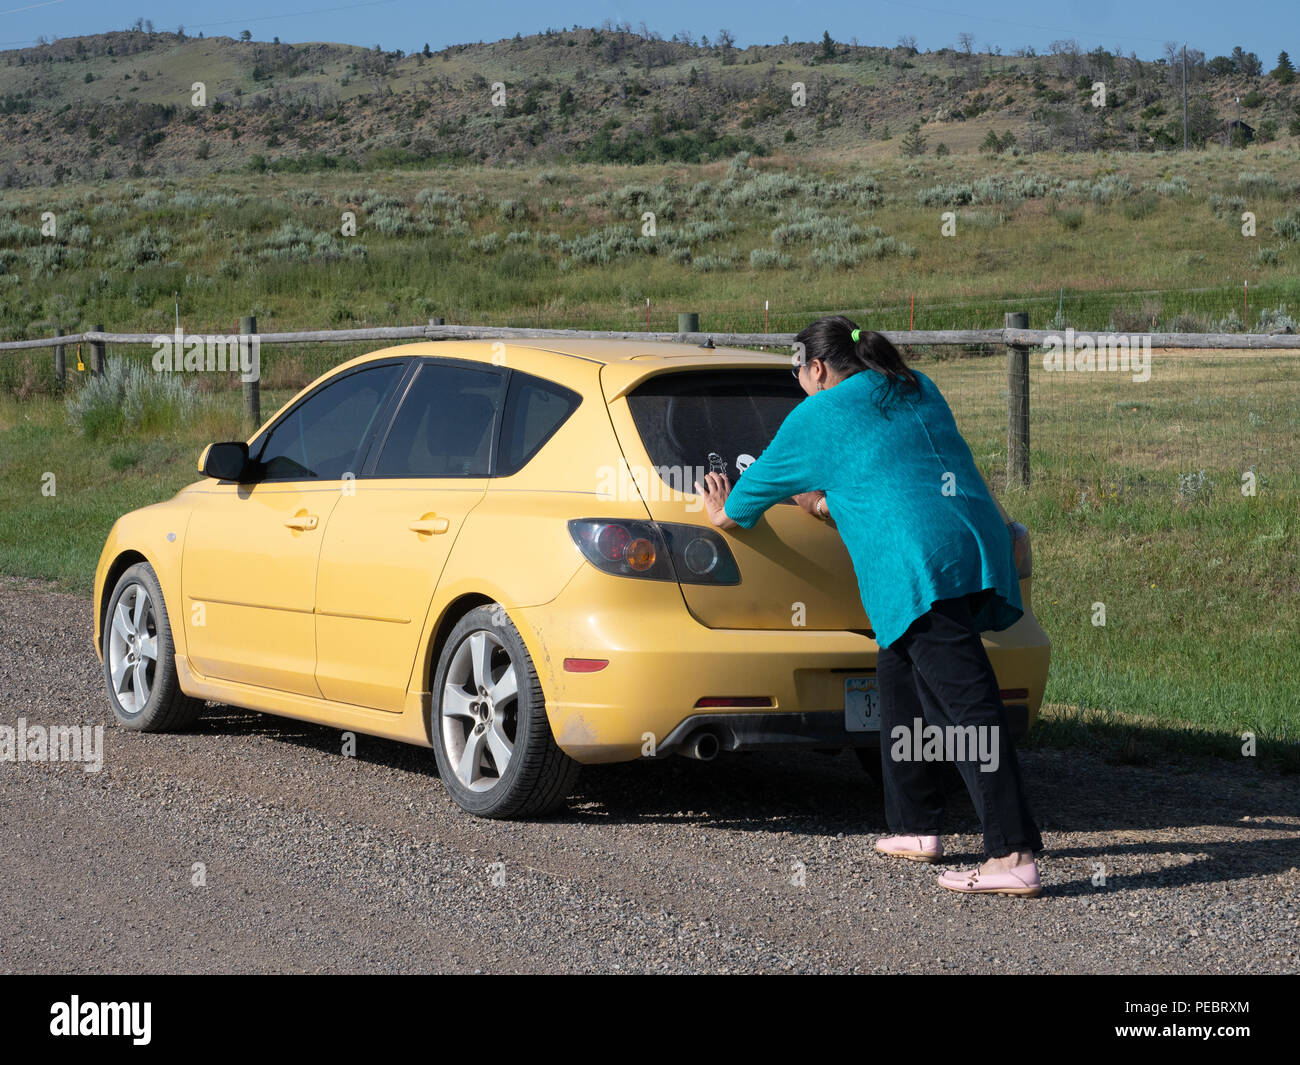 Hispanic woman pushing a compact yellow car after it has broken down in a rural area. Stock Photo